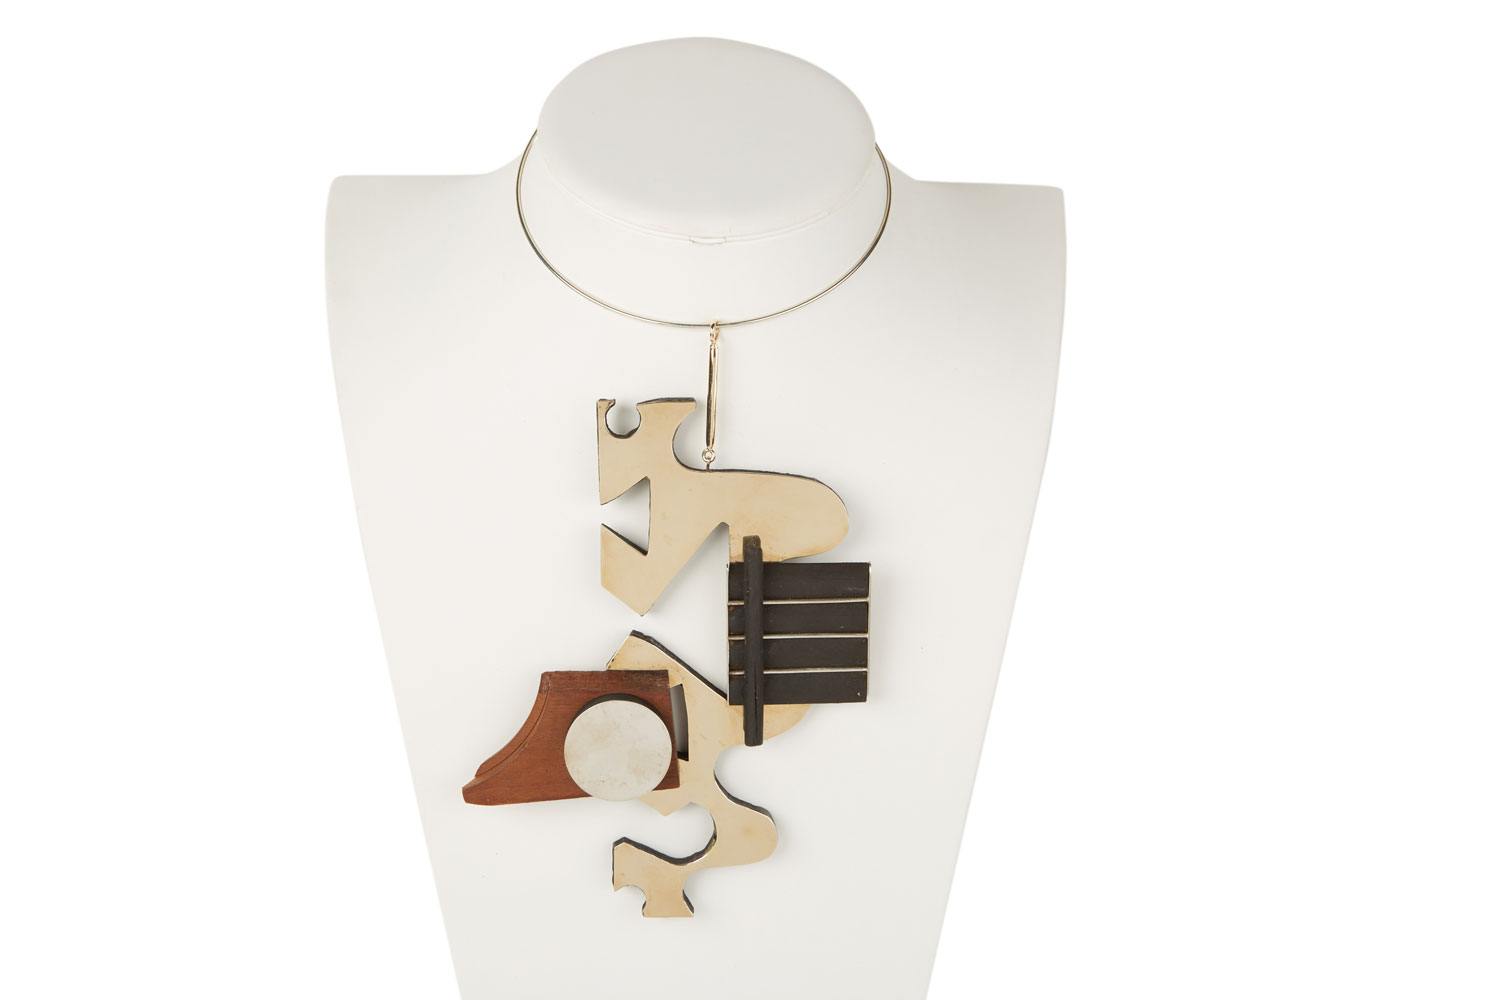 Louise Nevelson, Large pendant and torque, circa 1976–1977. The pendant is formed from four separate pieces of wood (circle, section of dowel, piece of molding, and a cut scrap of teak).